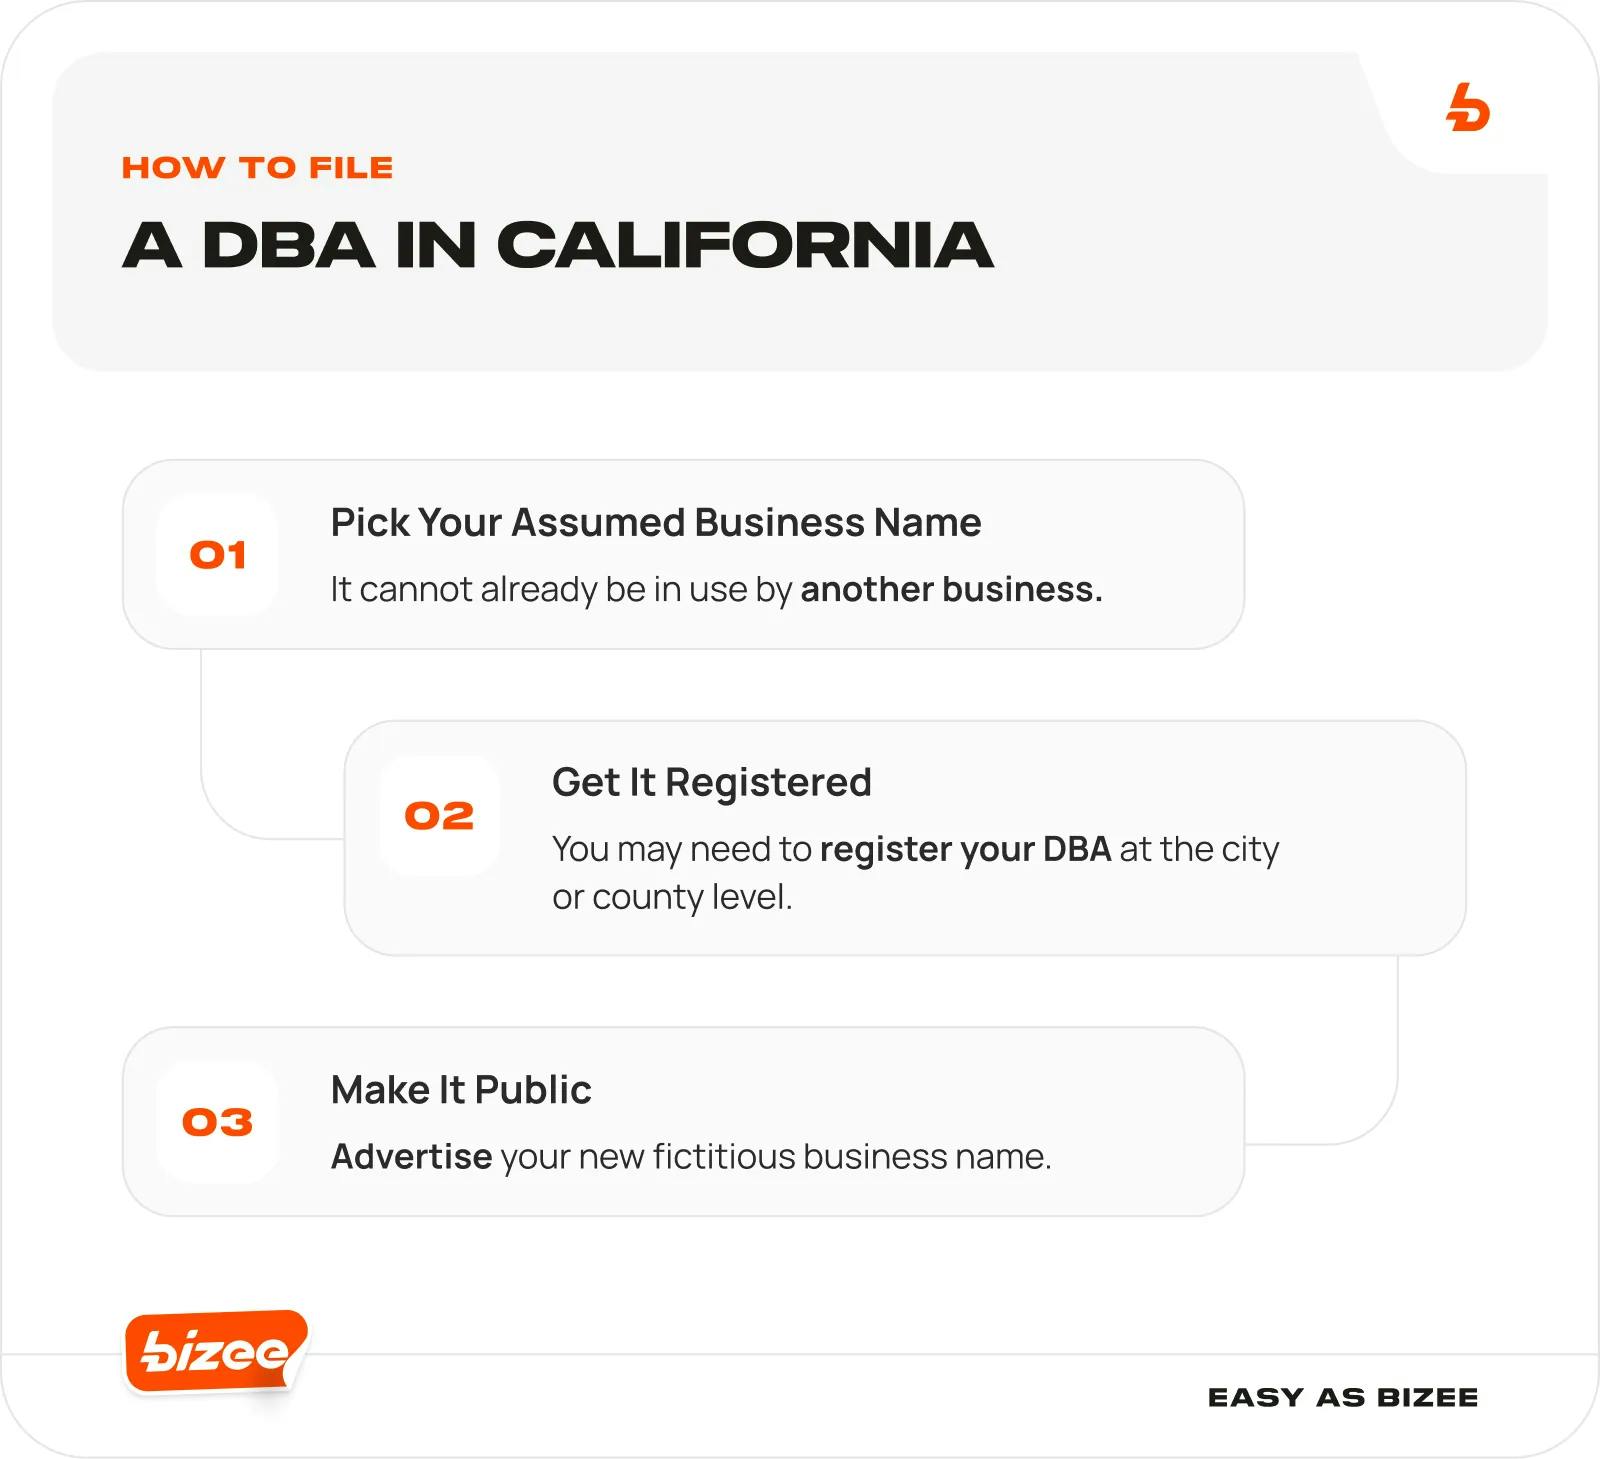 How to File a DBA in California